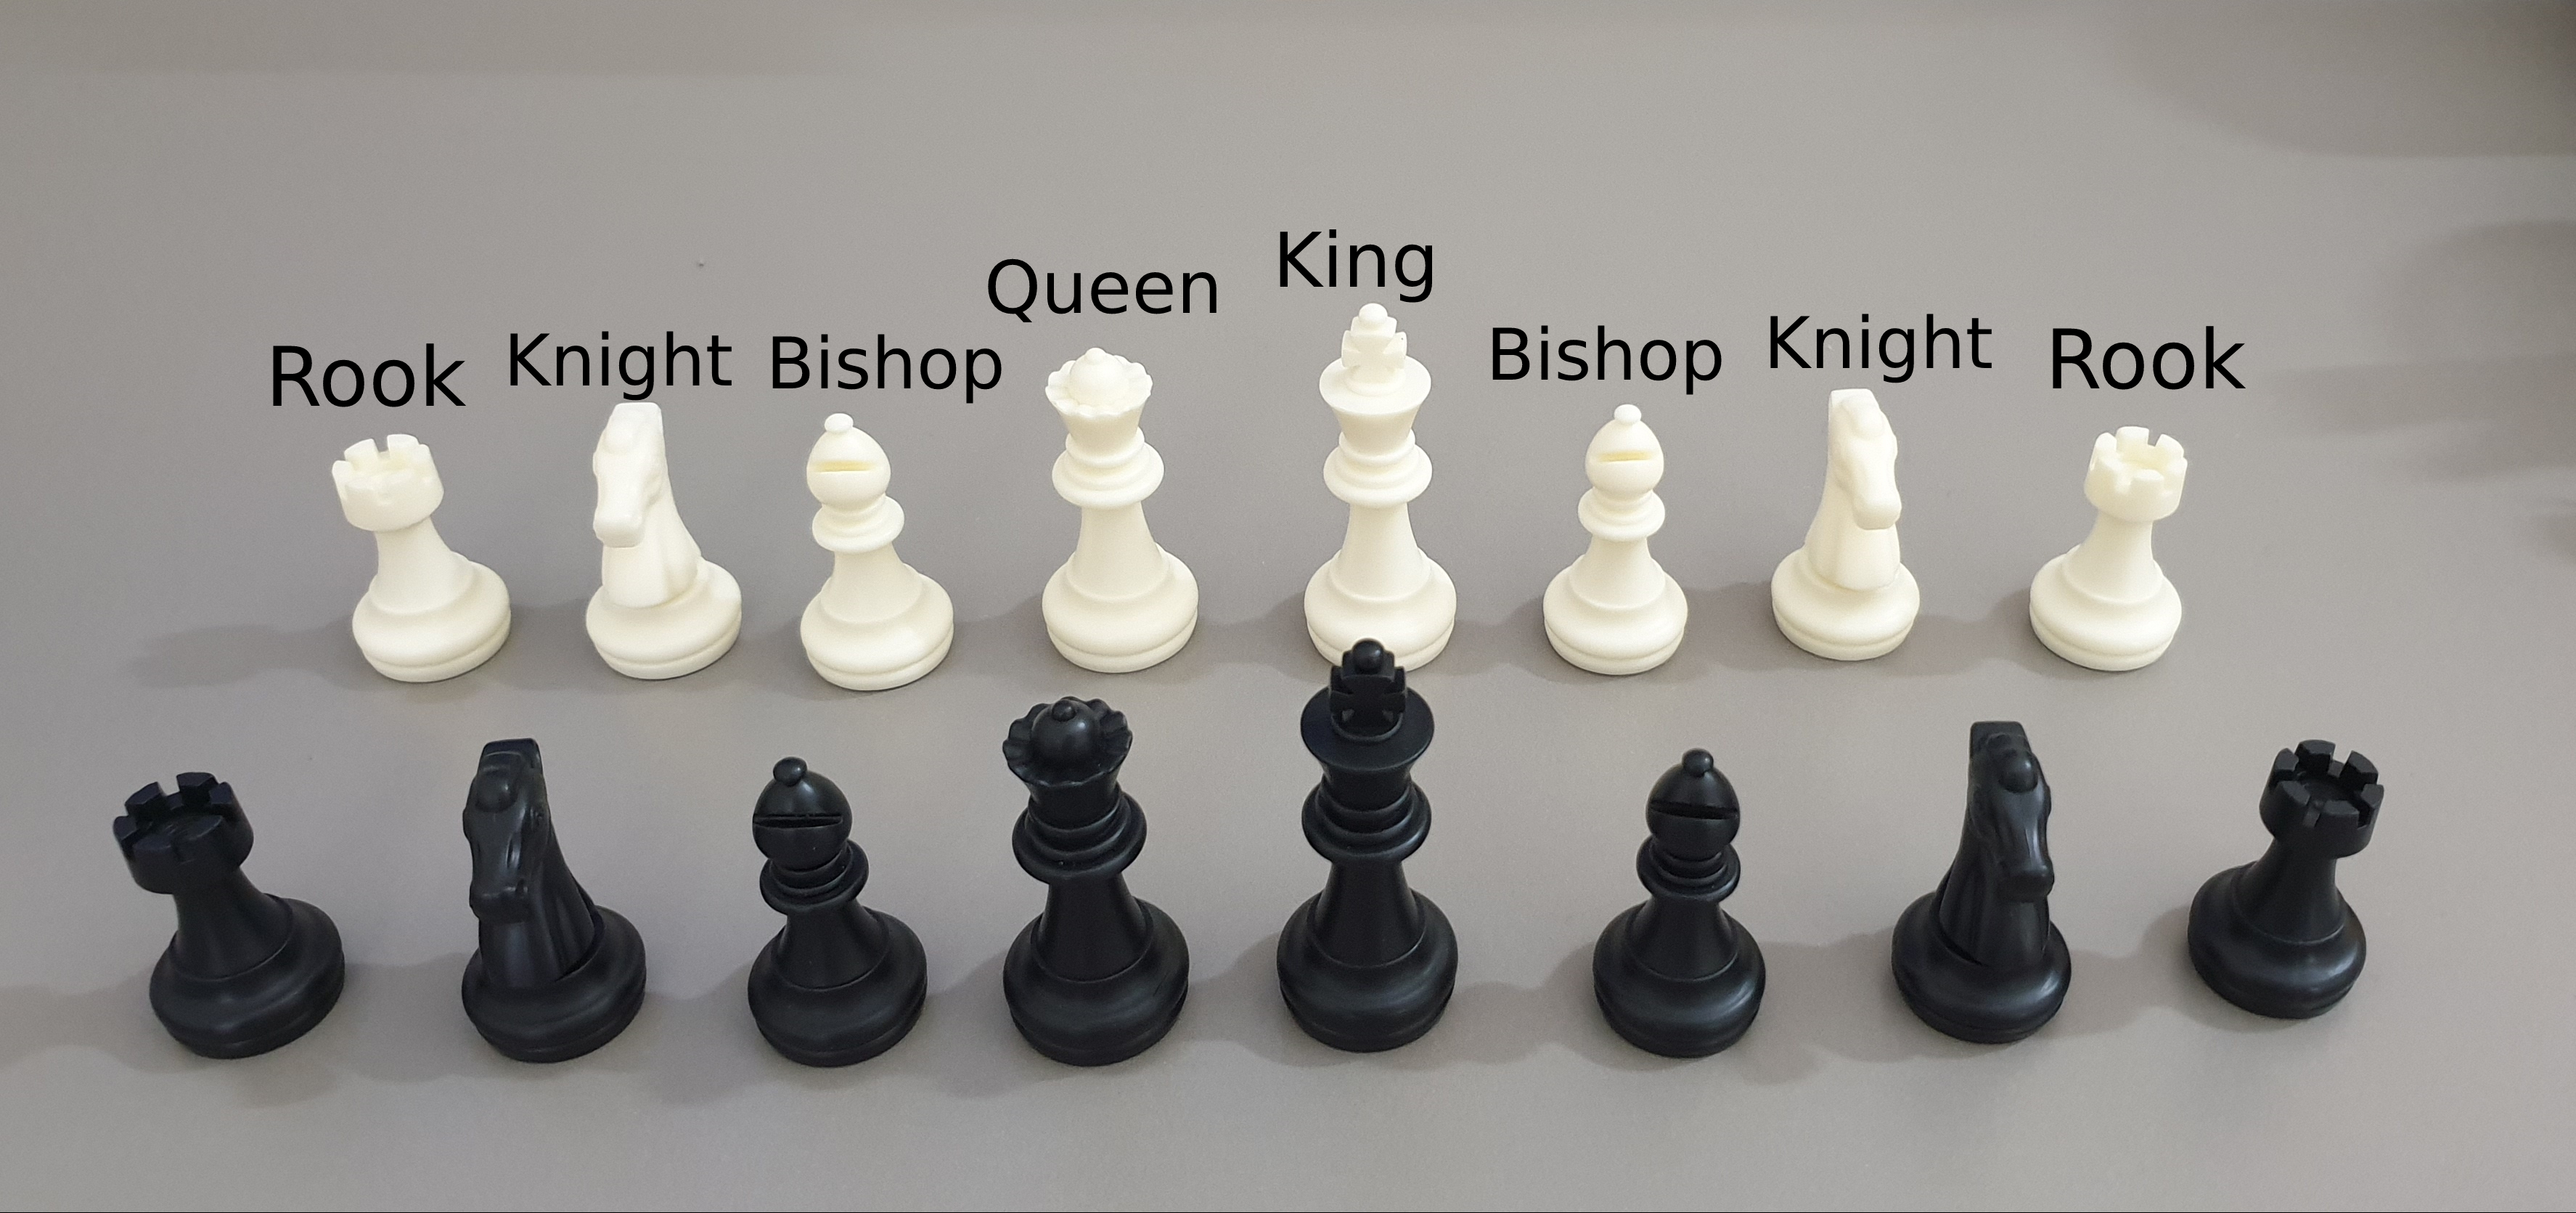 How did chess pieces get their names? - Big Think